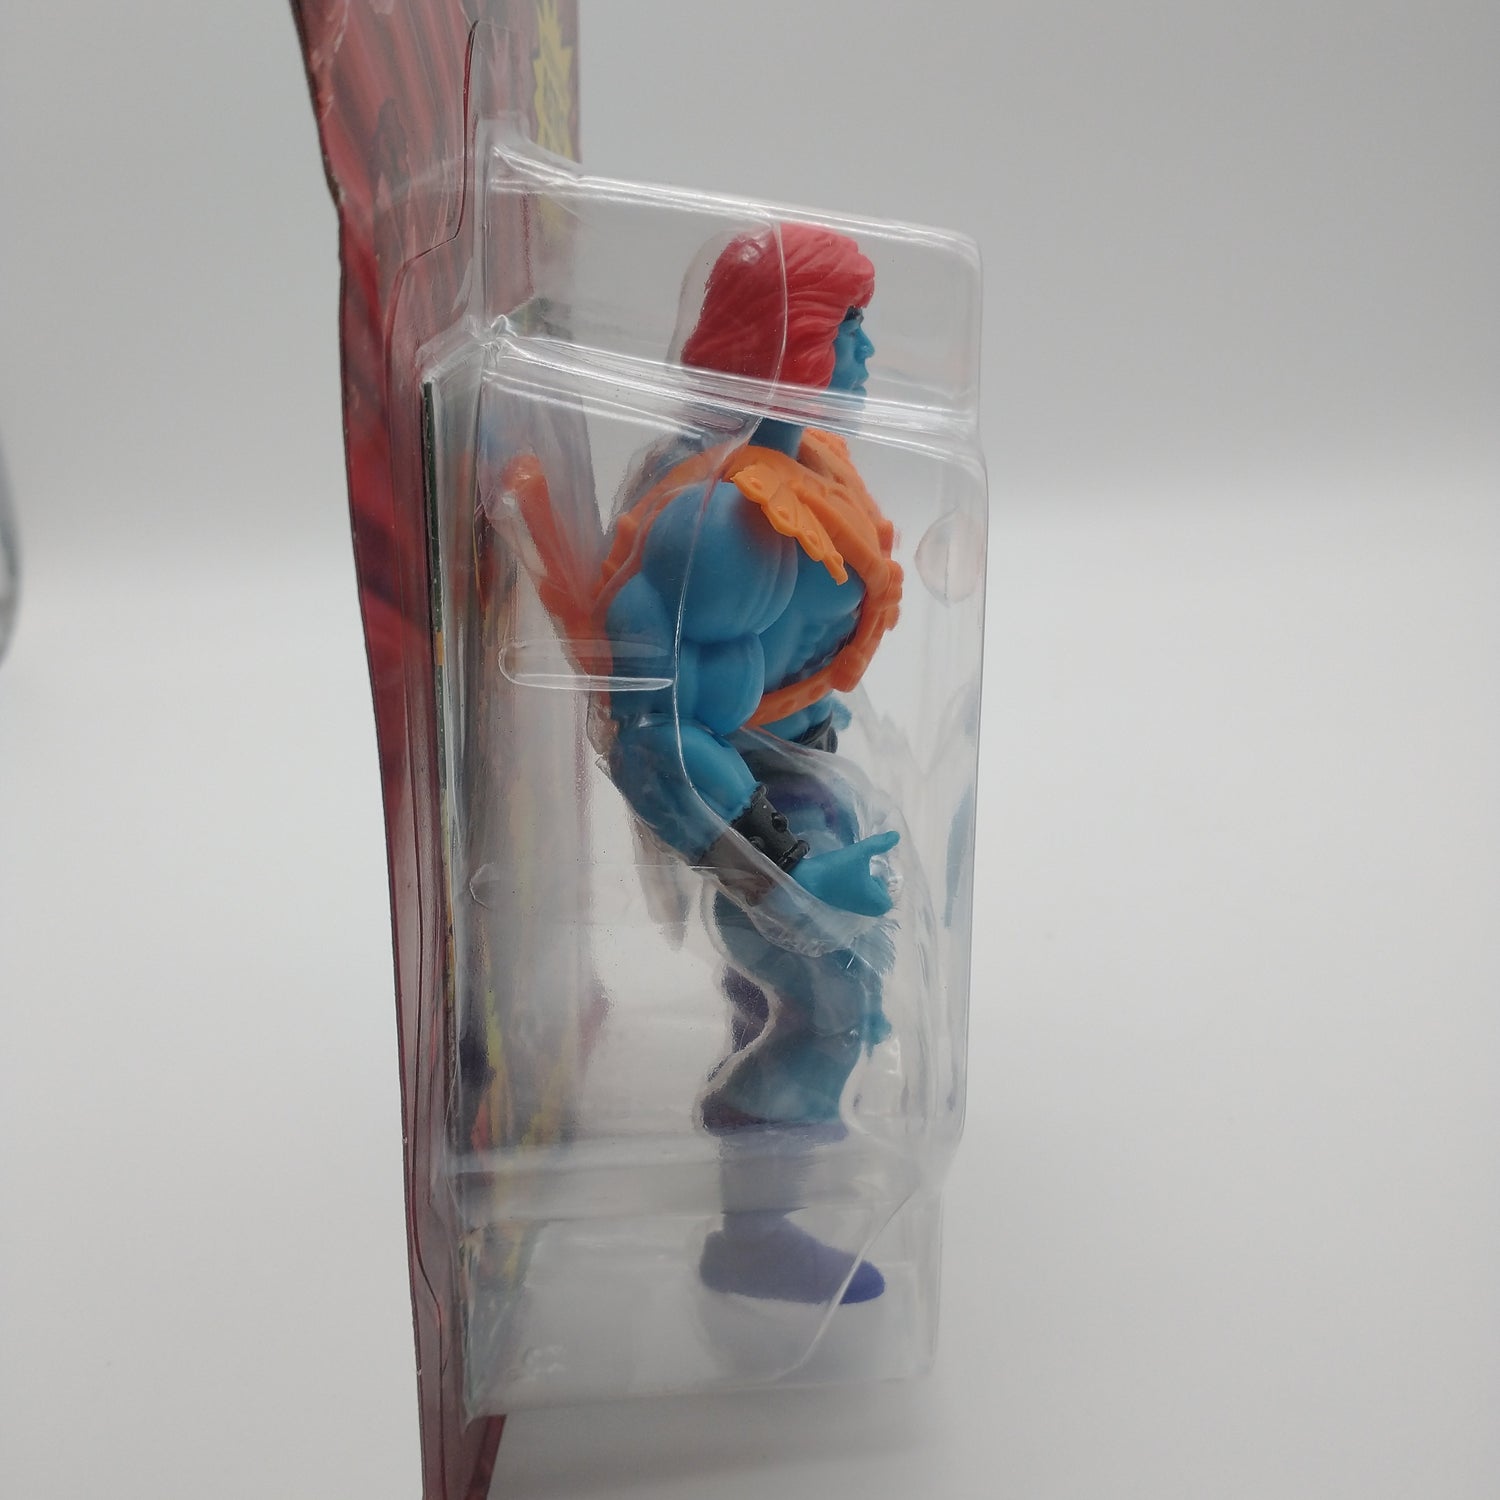  picture of the left side of the cart and bubble. The action figure is inside.